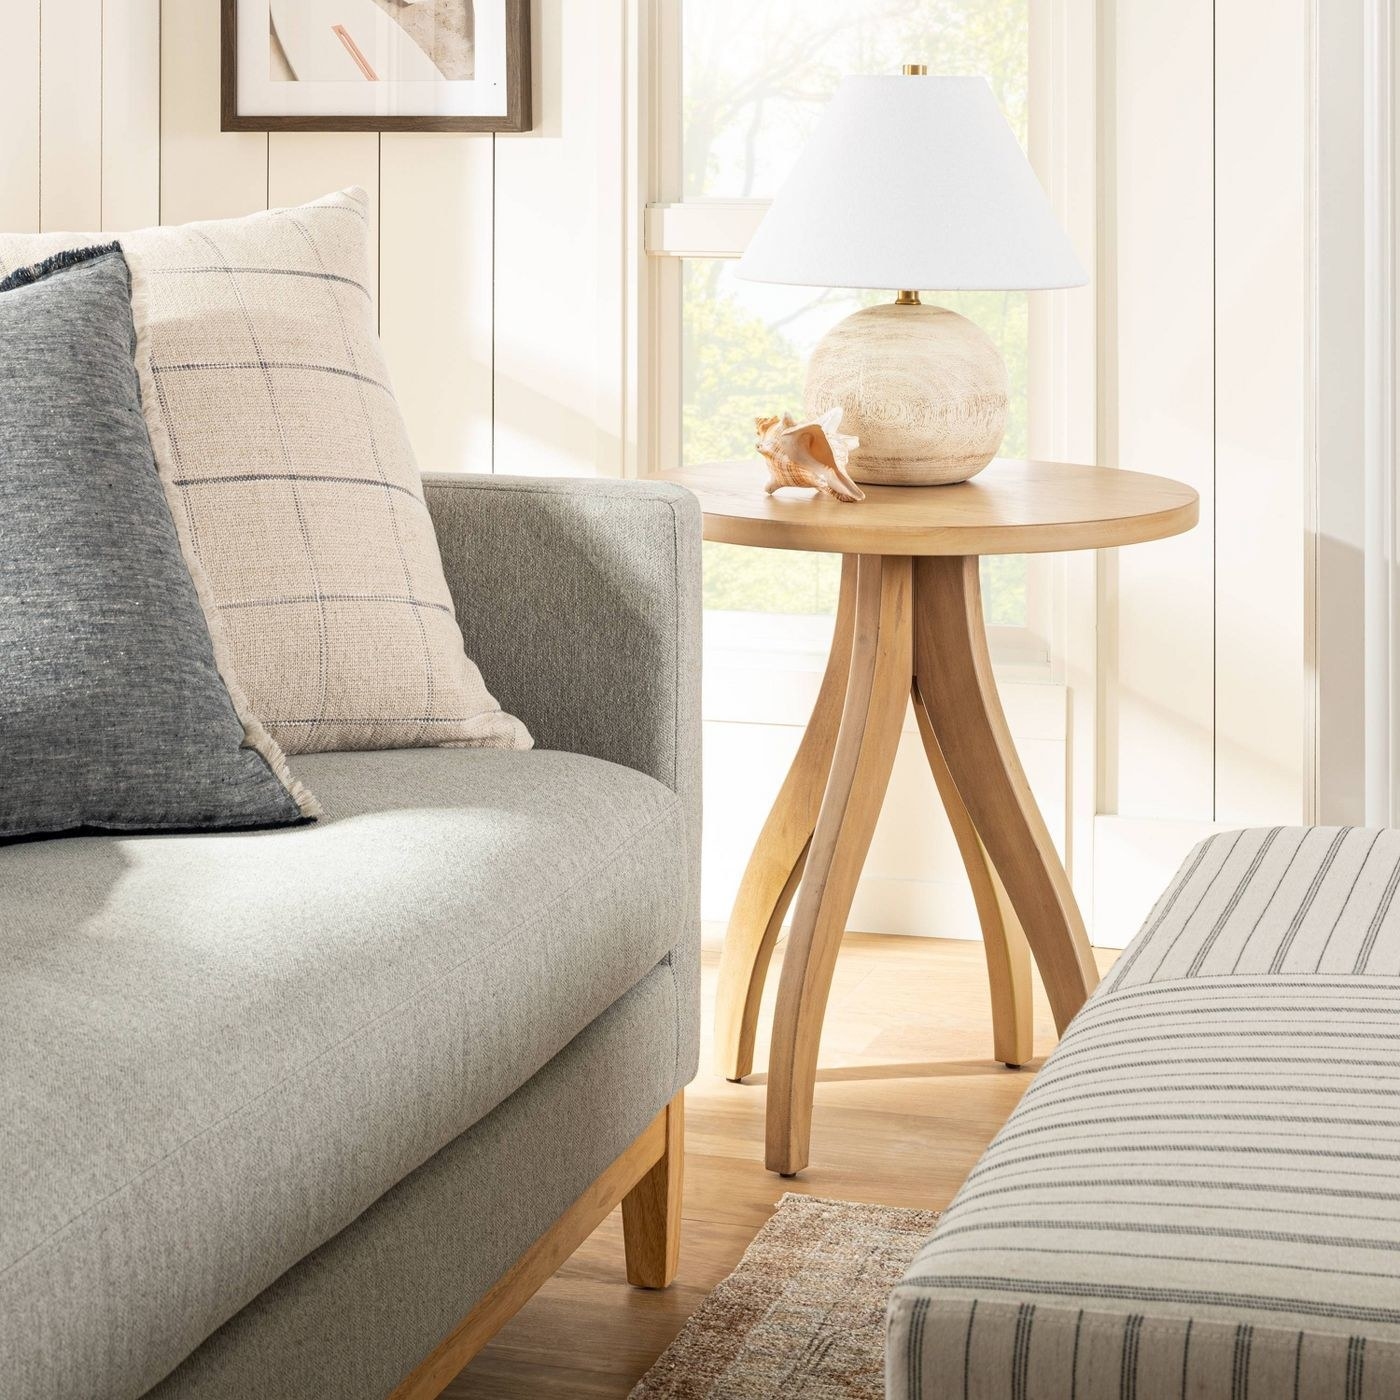 light wood side table with curved legs, next to a gray couch